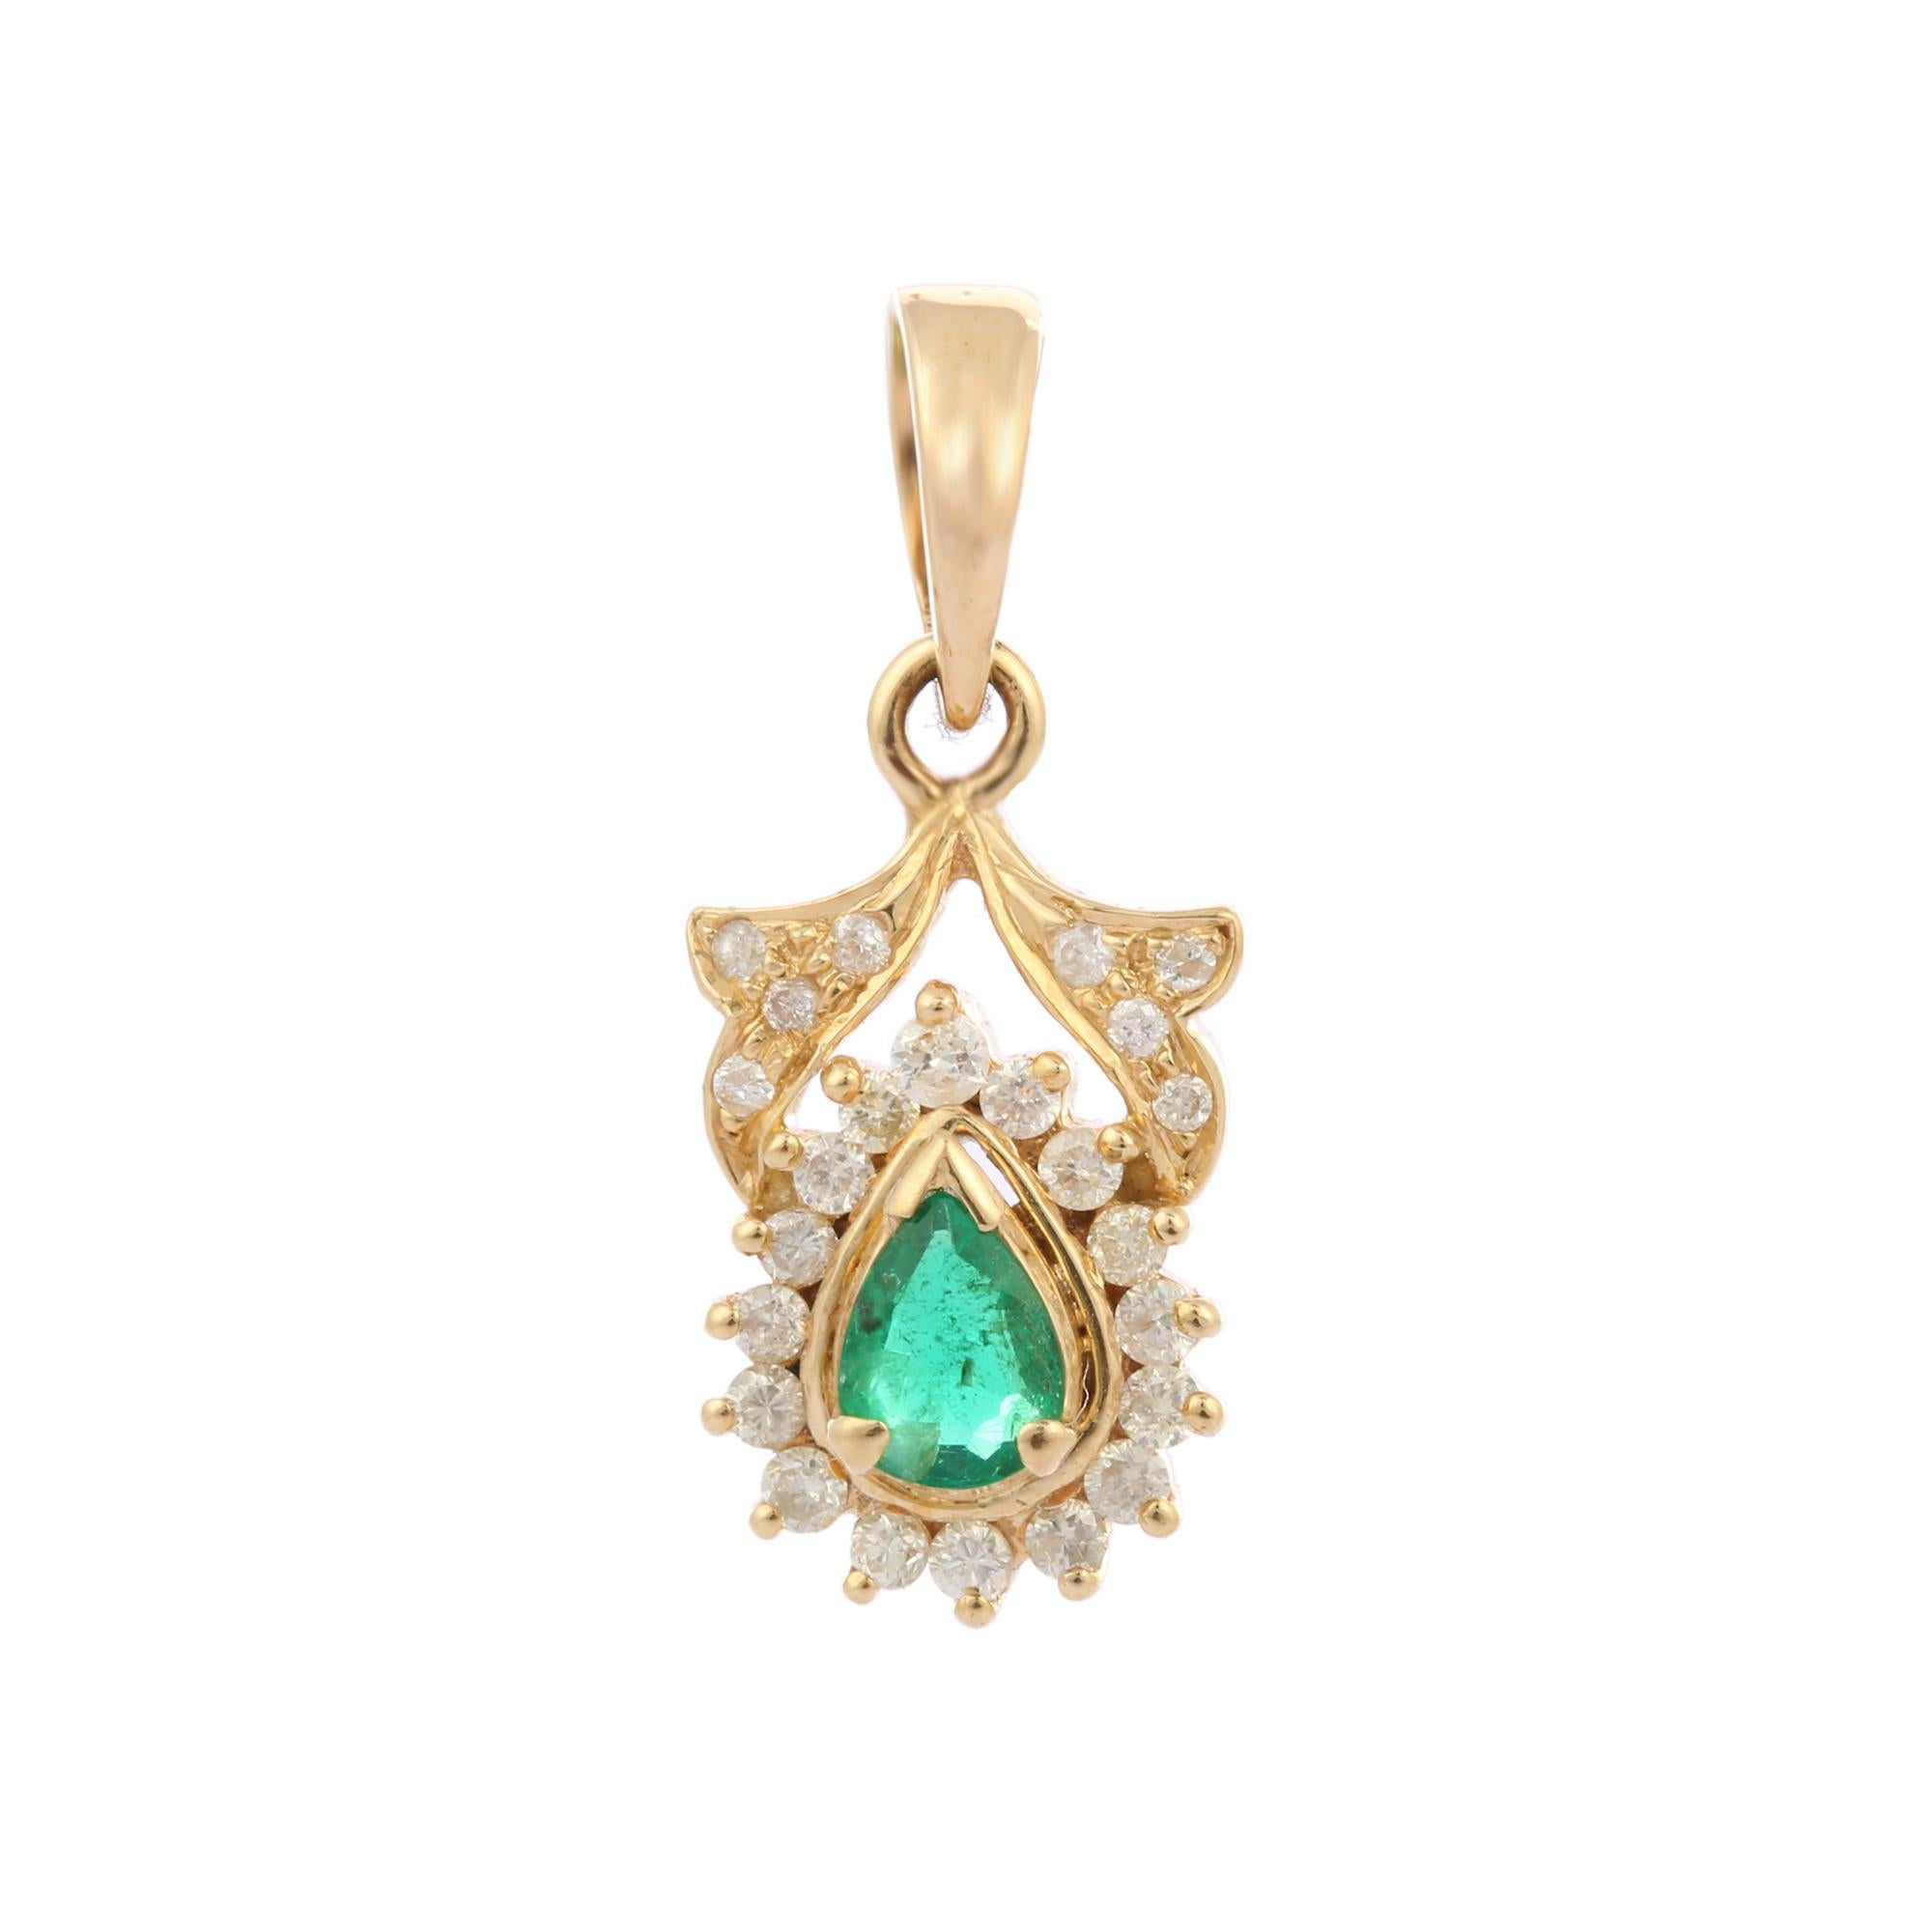 Women's Pear Cut Emerald Diamond Pendant 14k Yellow Gold, Bride To Be Gift For Women For Sale